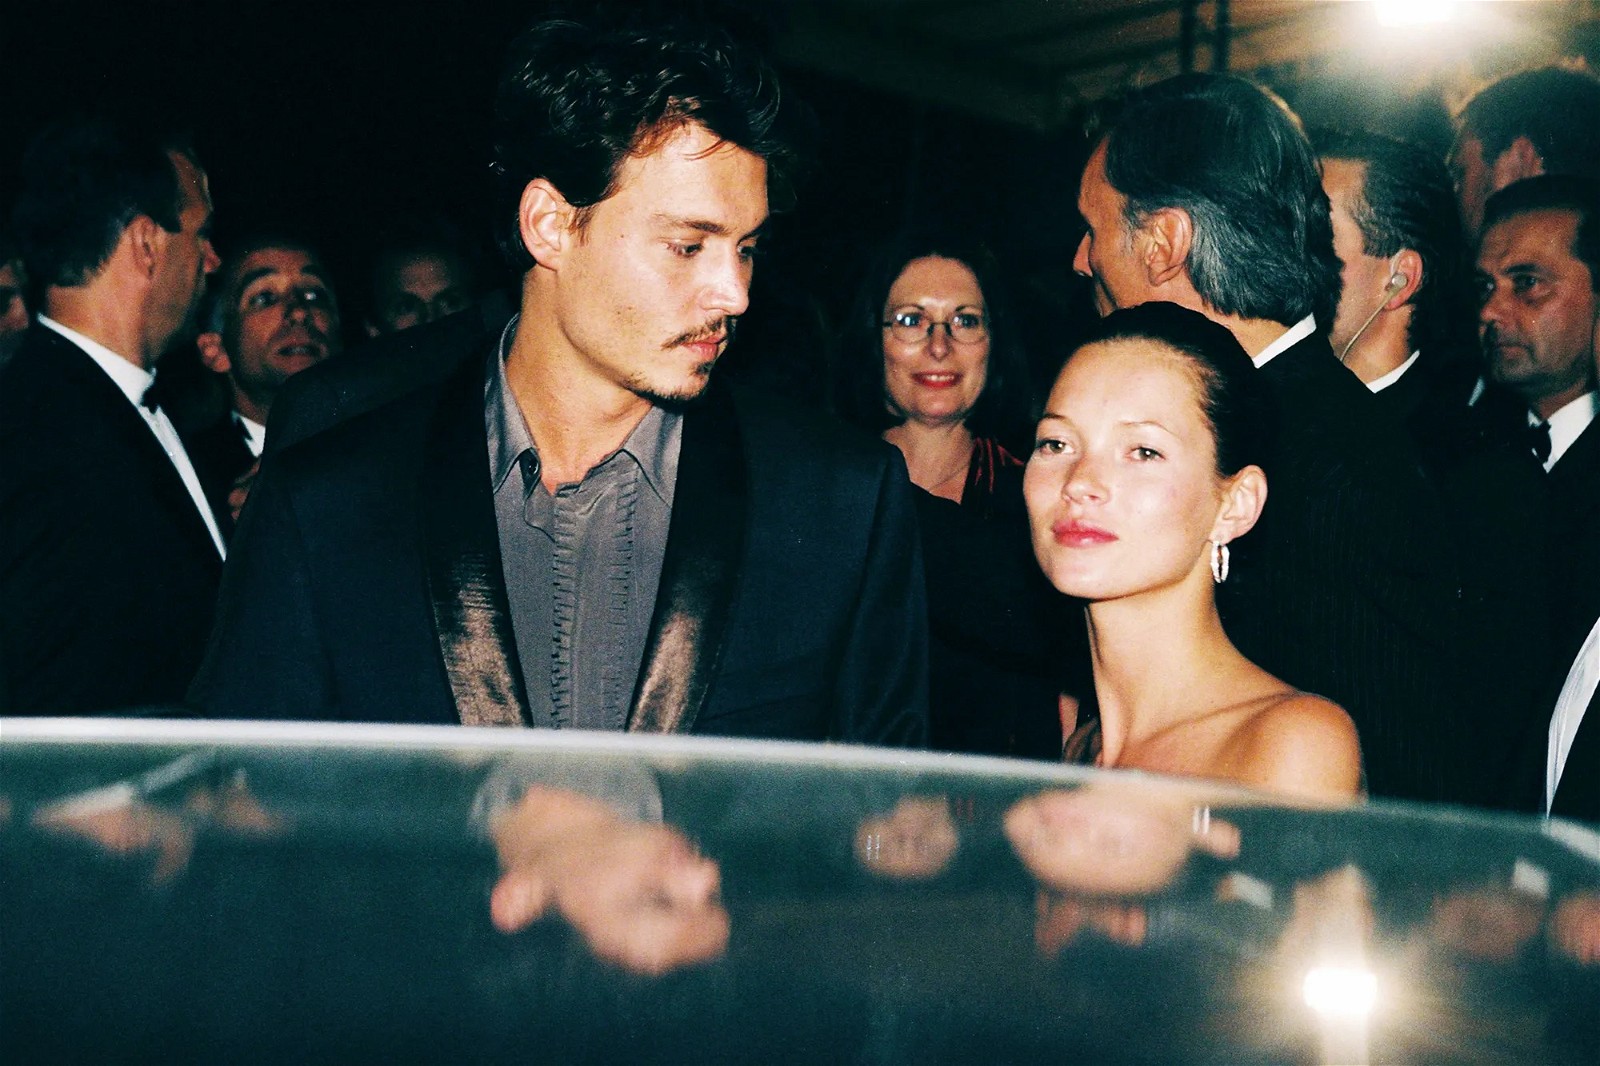 Johnny Depp and Kate Moss at the 1998 Cannes Film Festival